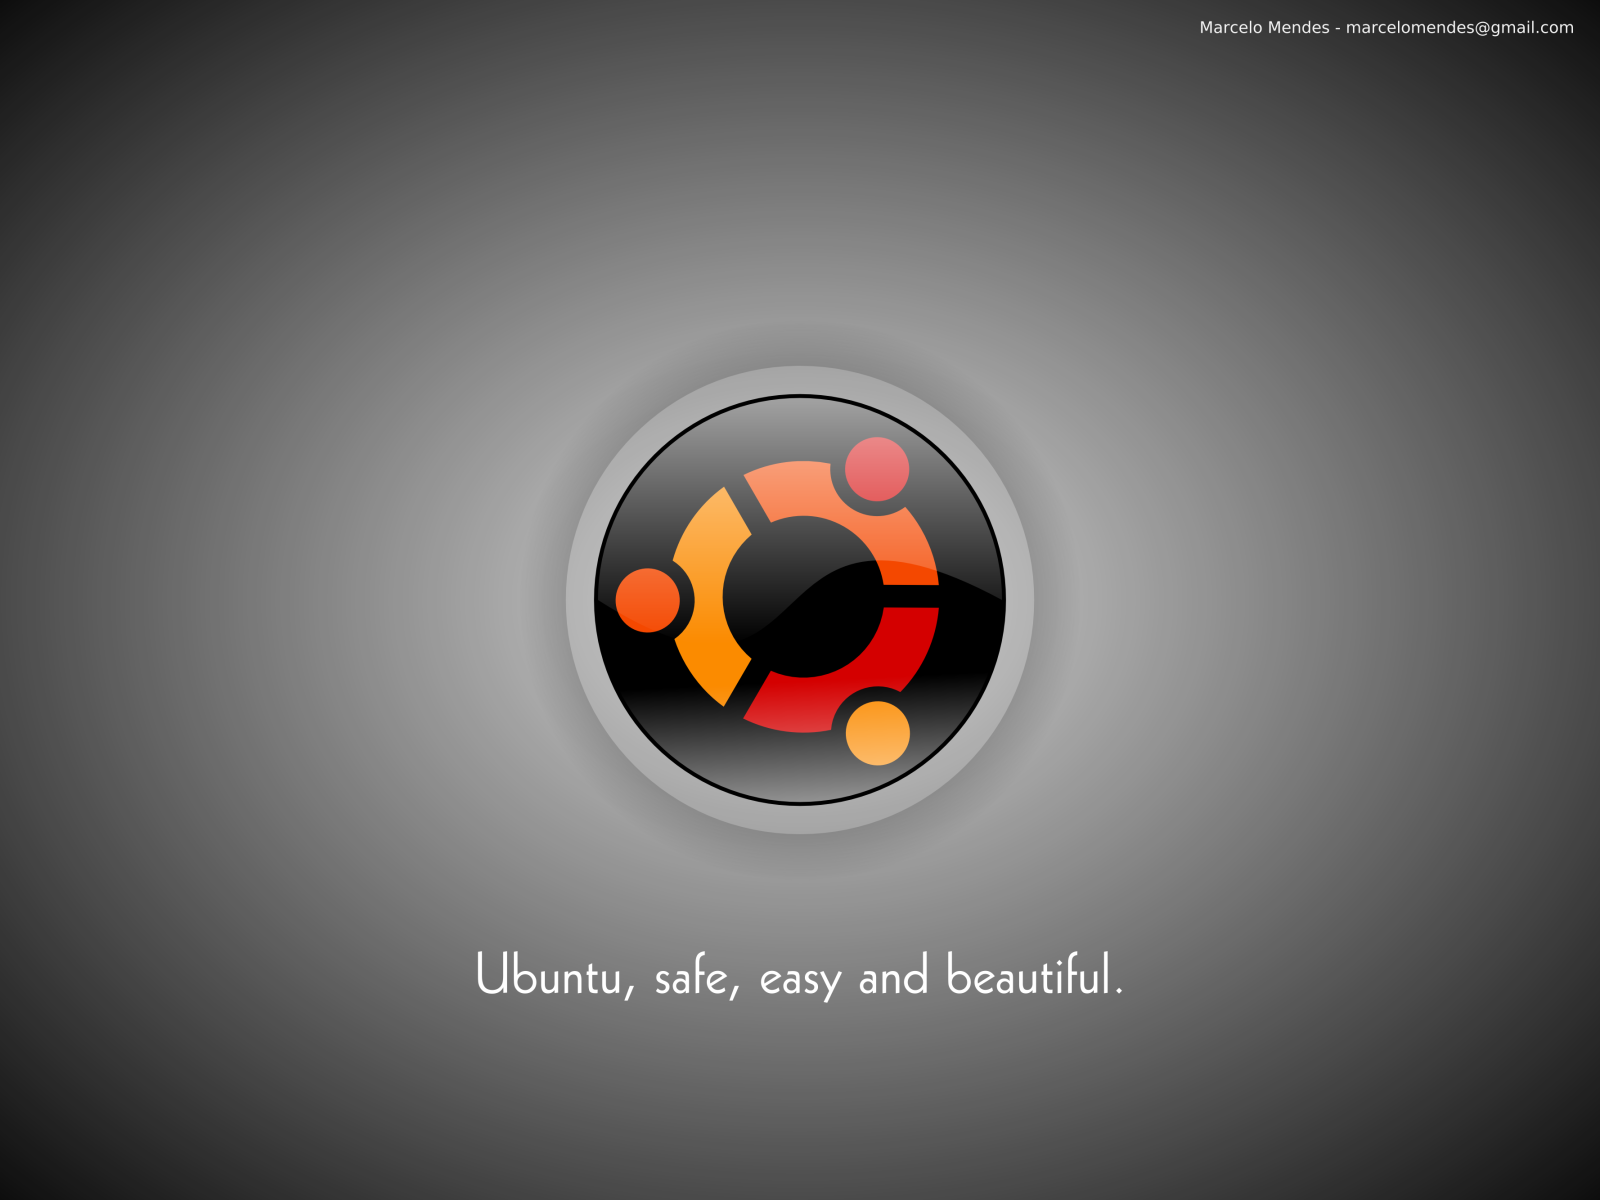 Ubuntu Wallpapers, hq ubuntu wallpapers, hd ubuntu wallpapers, high ...